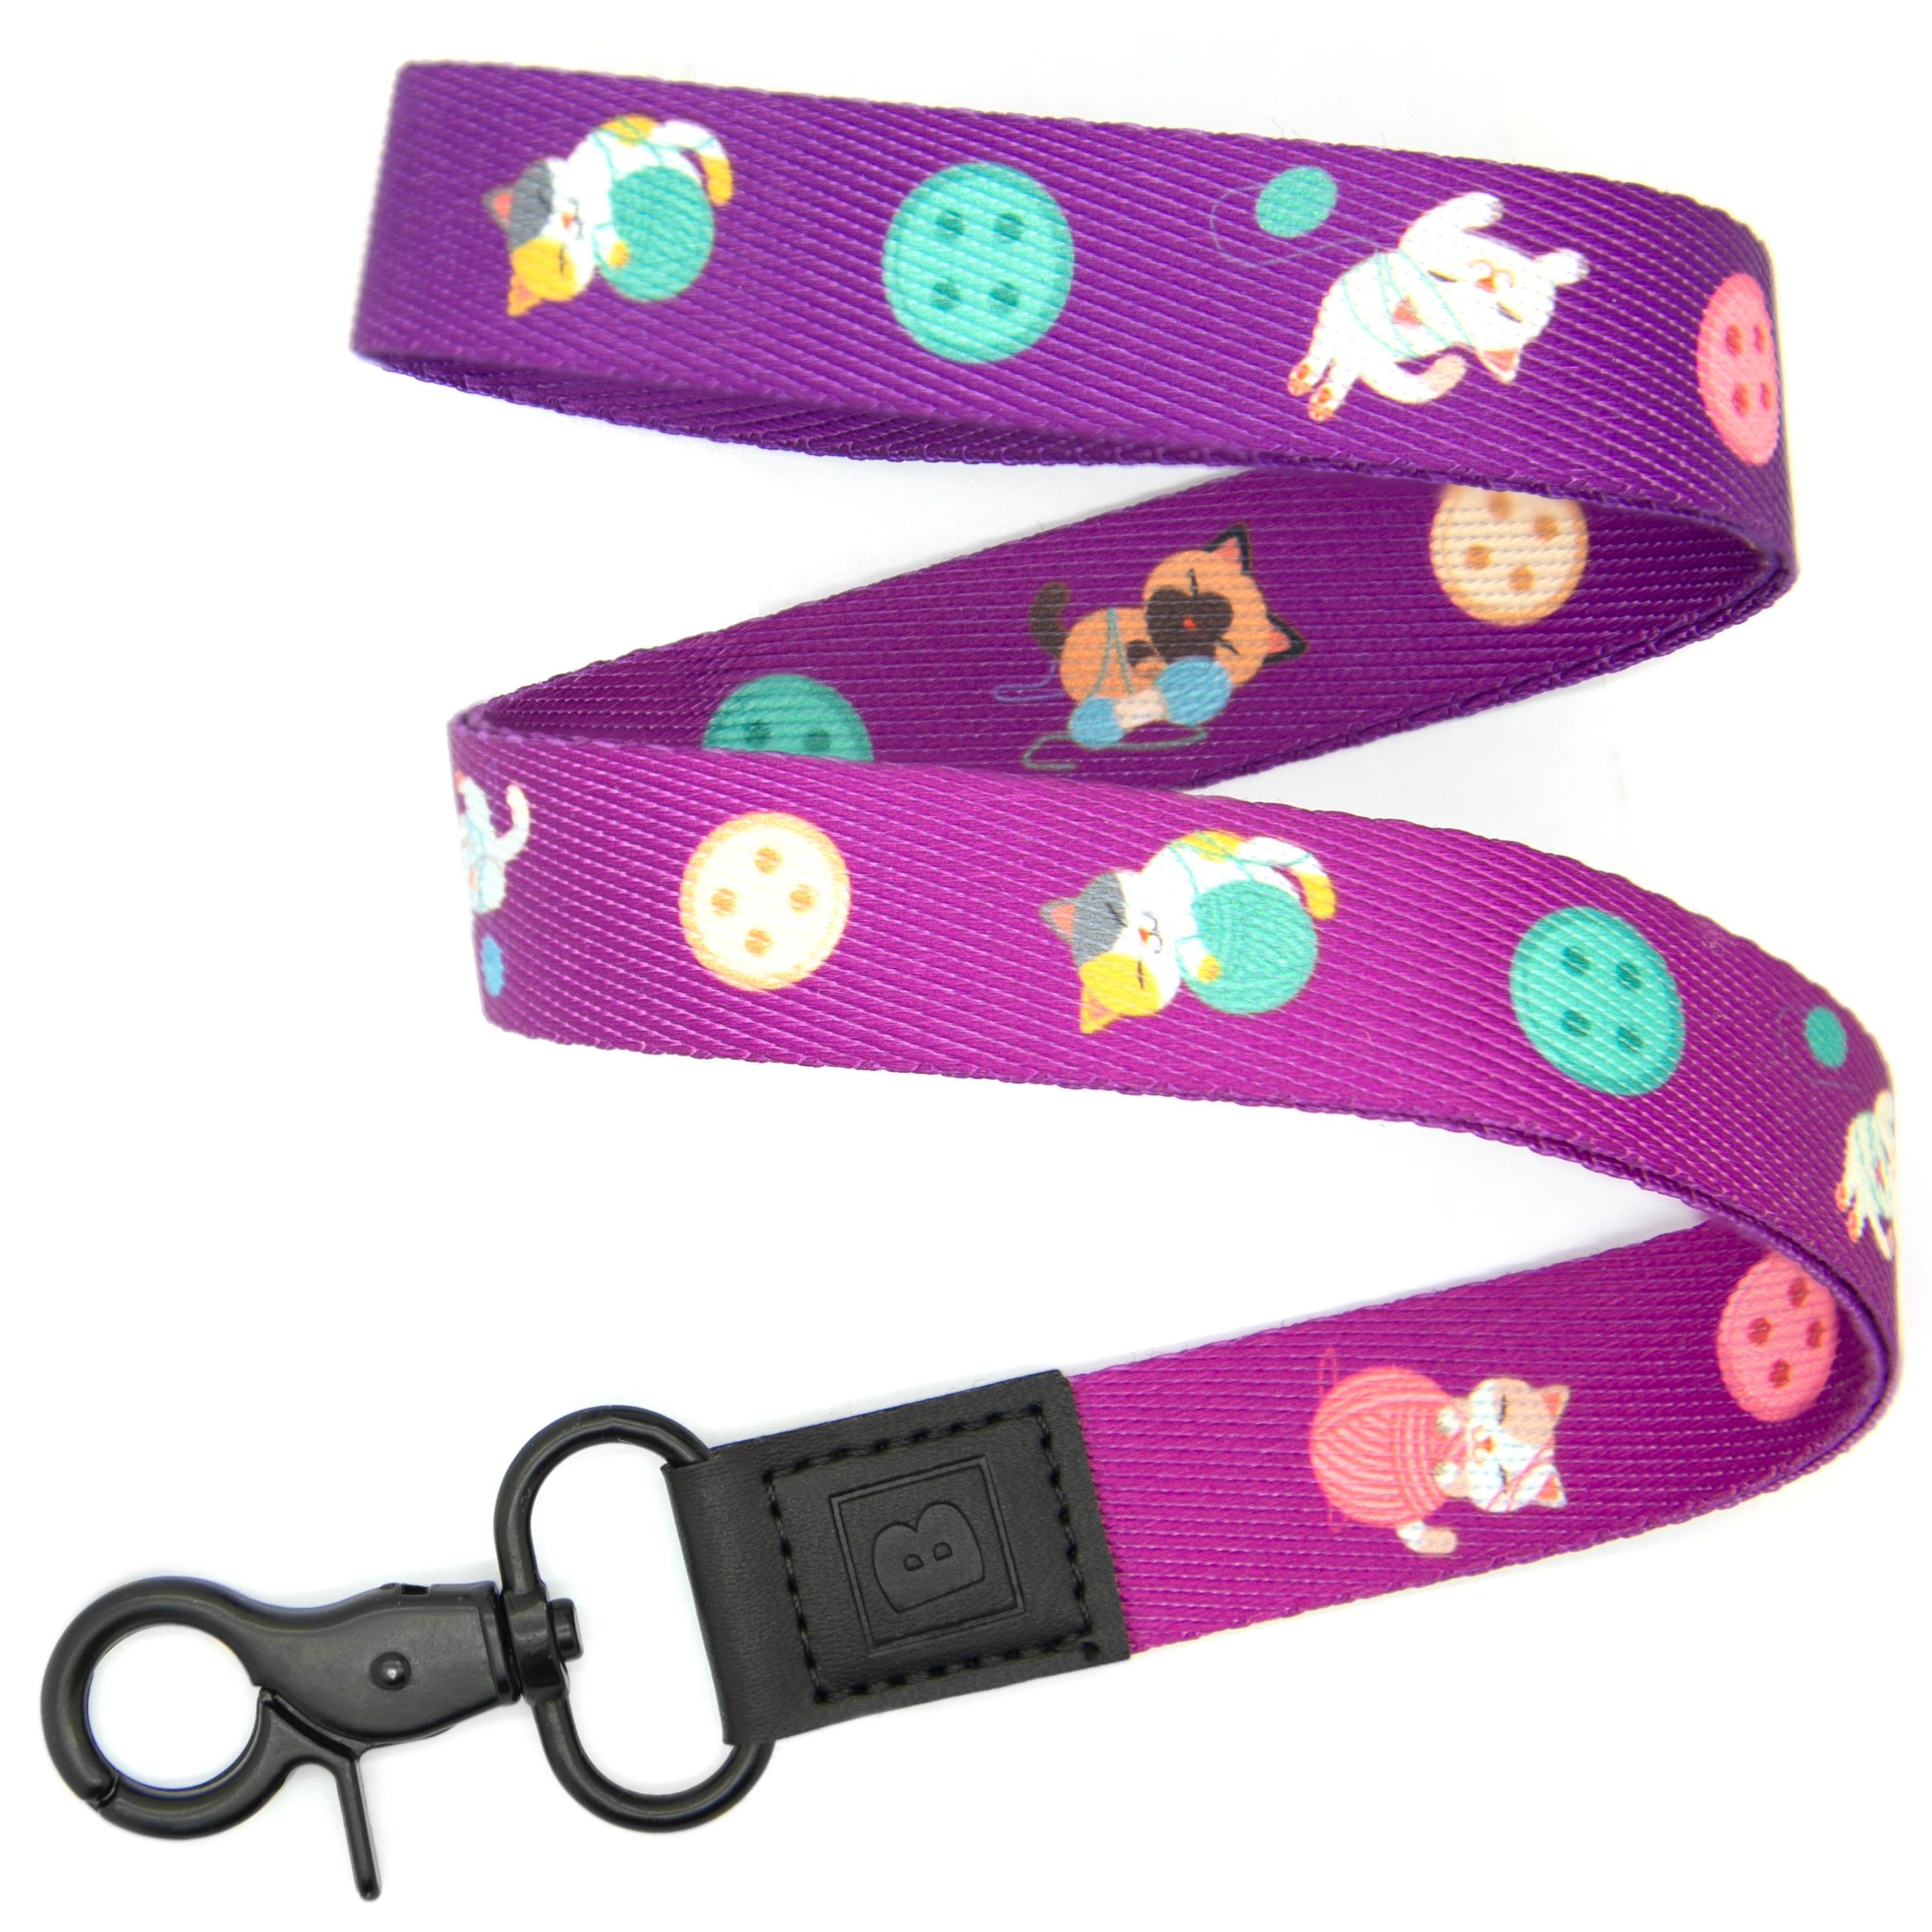 Purrfectly Purple: Cat Lover’s Lanyard with Lobster Metal Clip by BadgeZoo